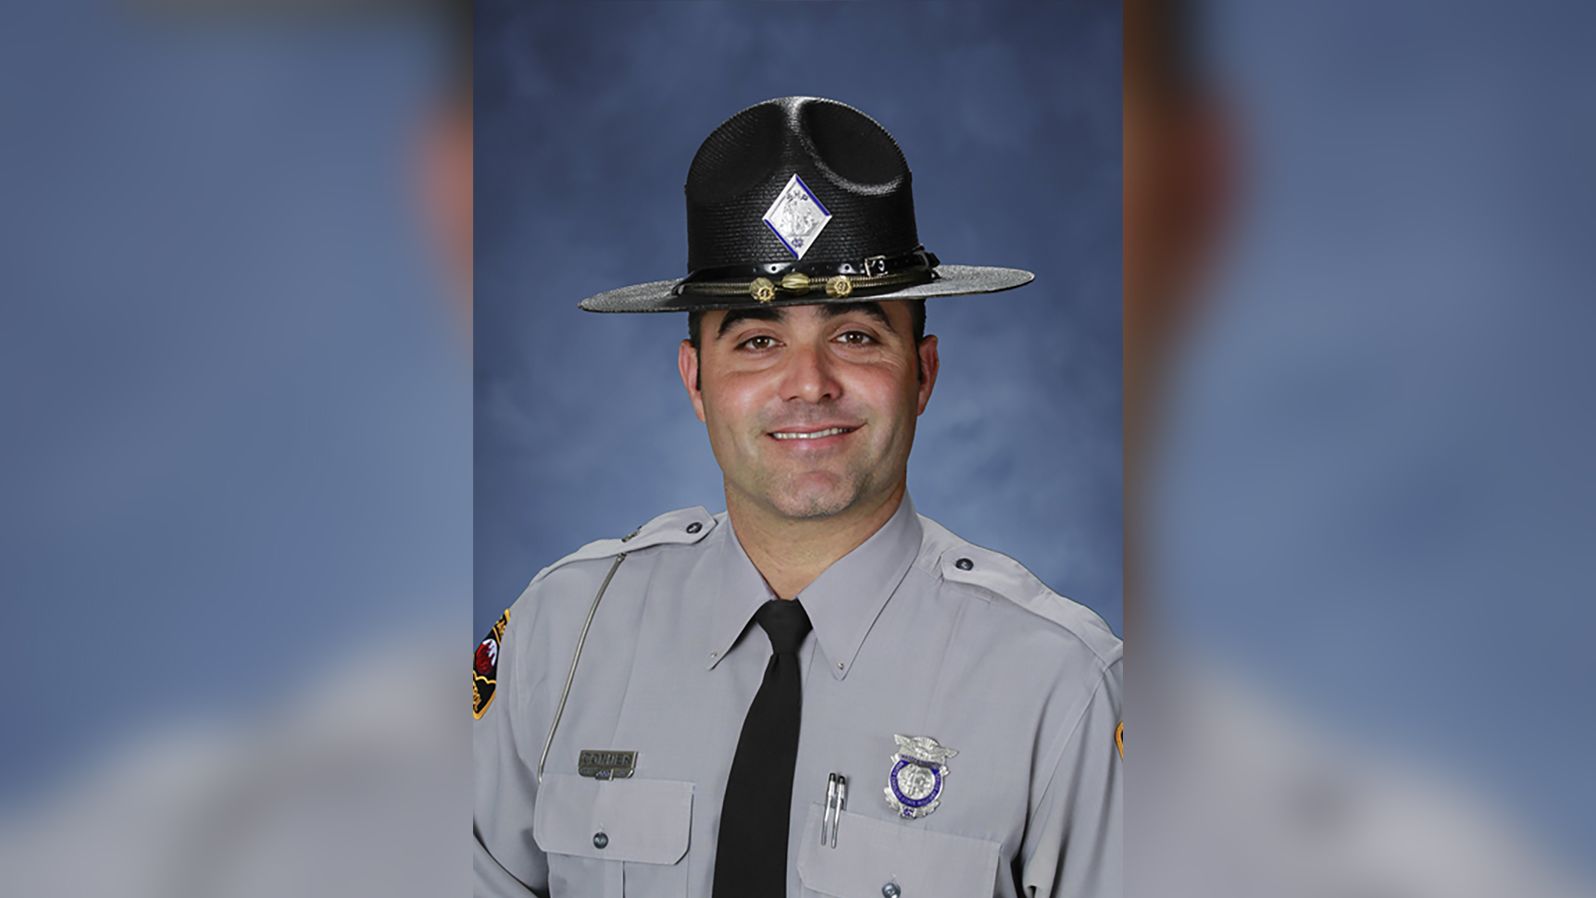 Trooper Kevin K. Conner was an 11-year veteran of the North Carolina State Highway Patrol.